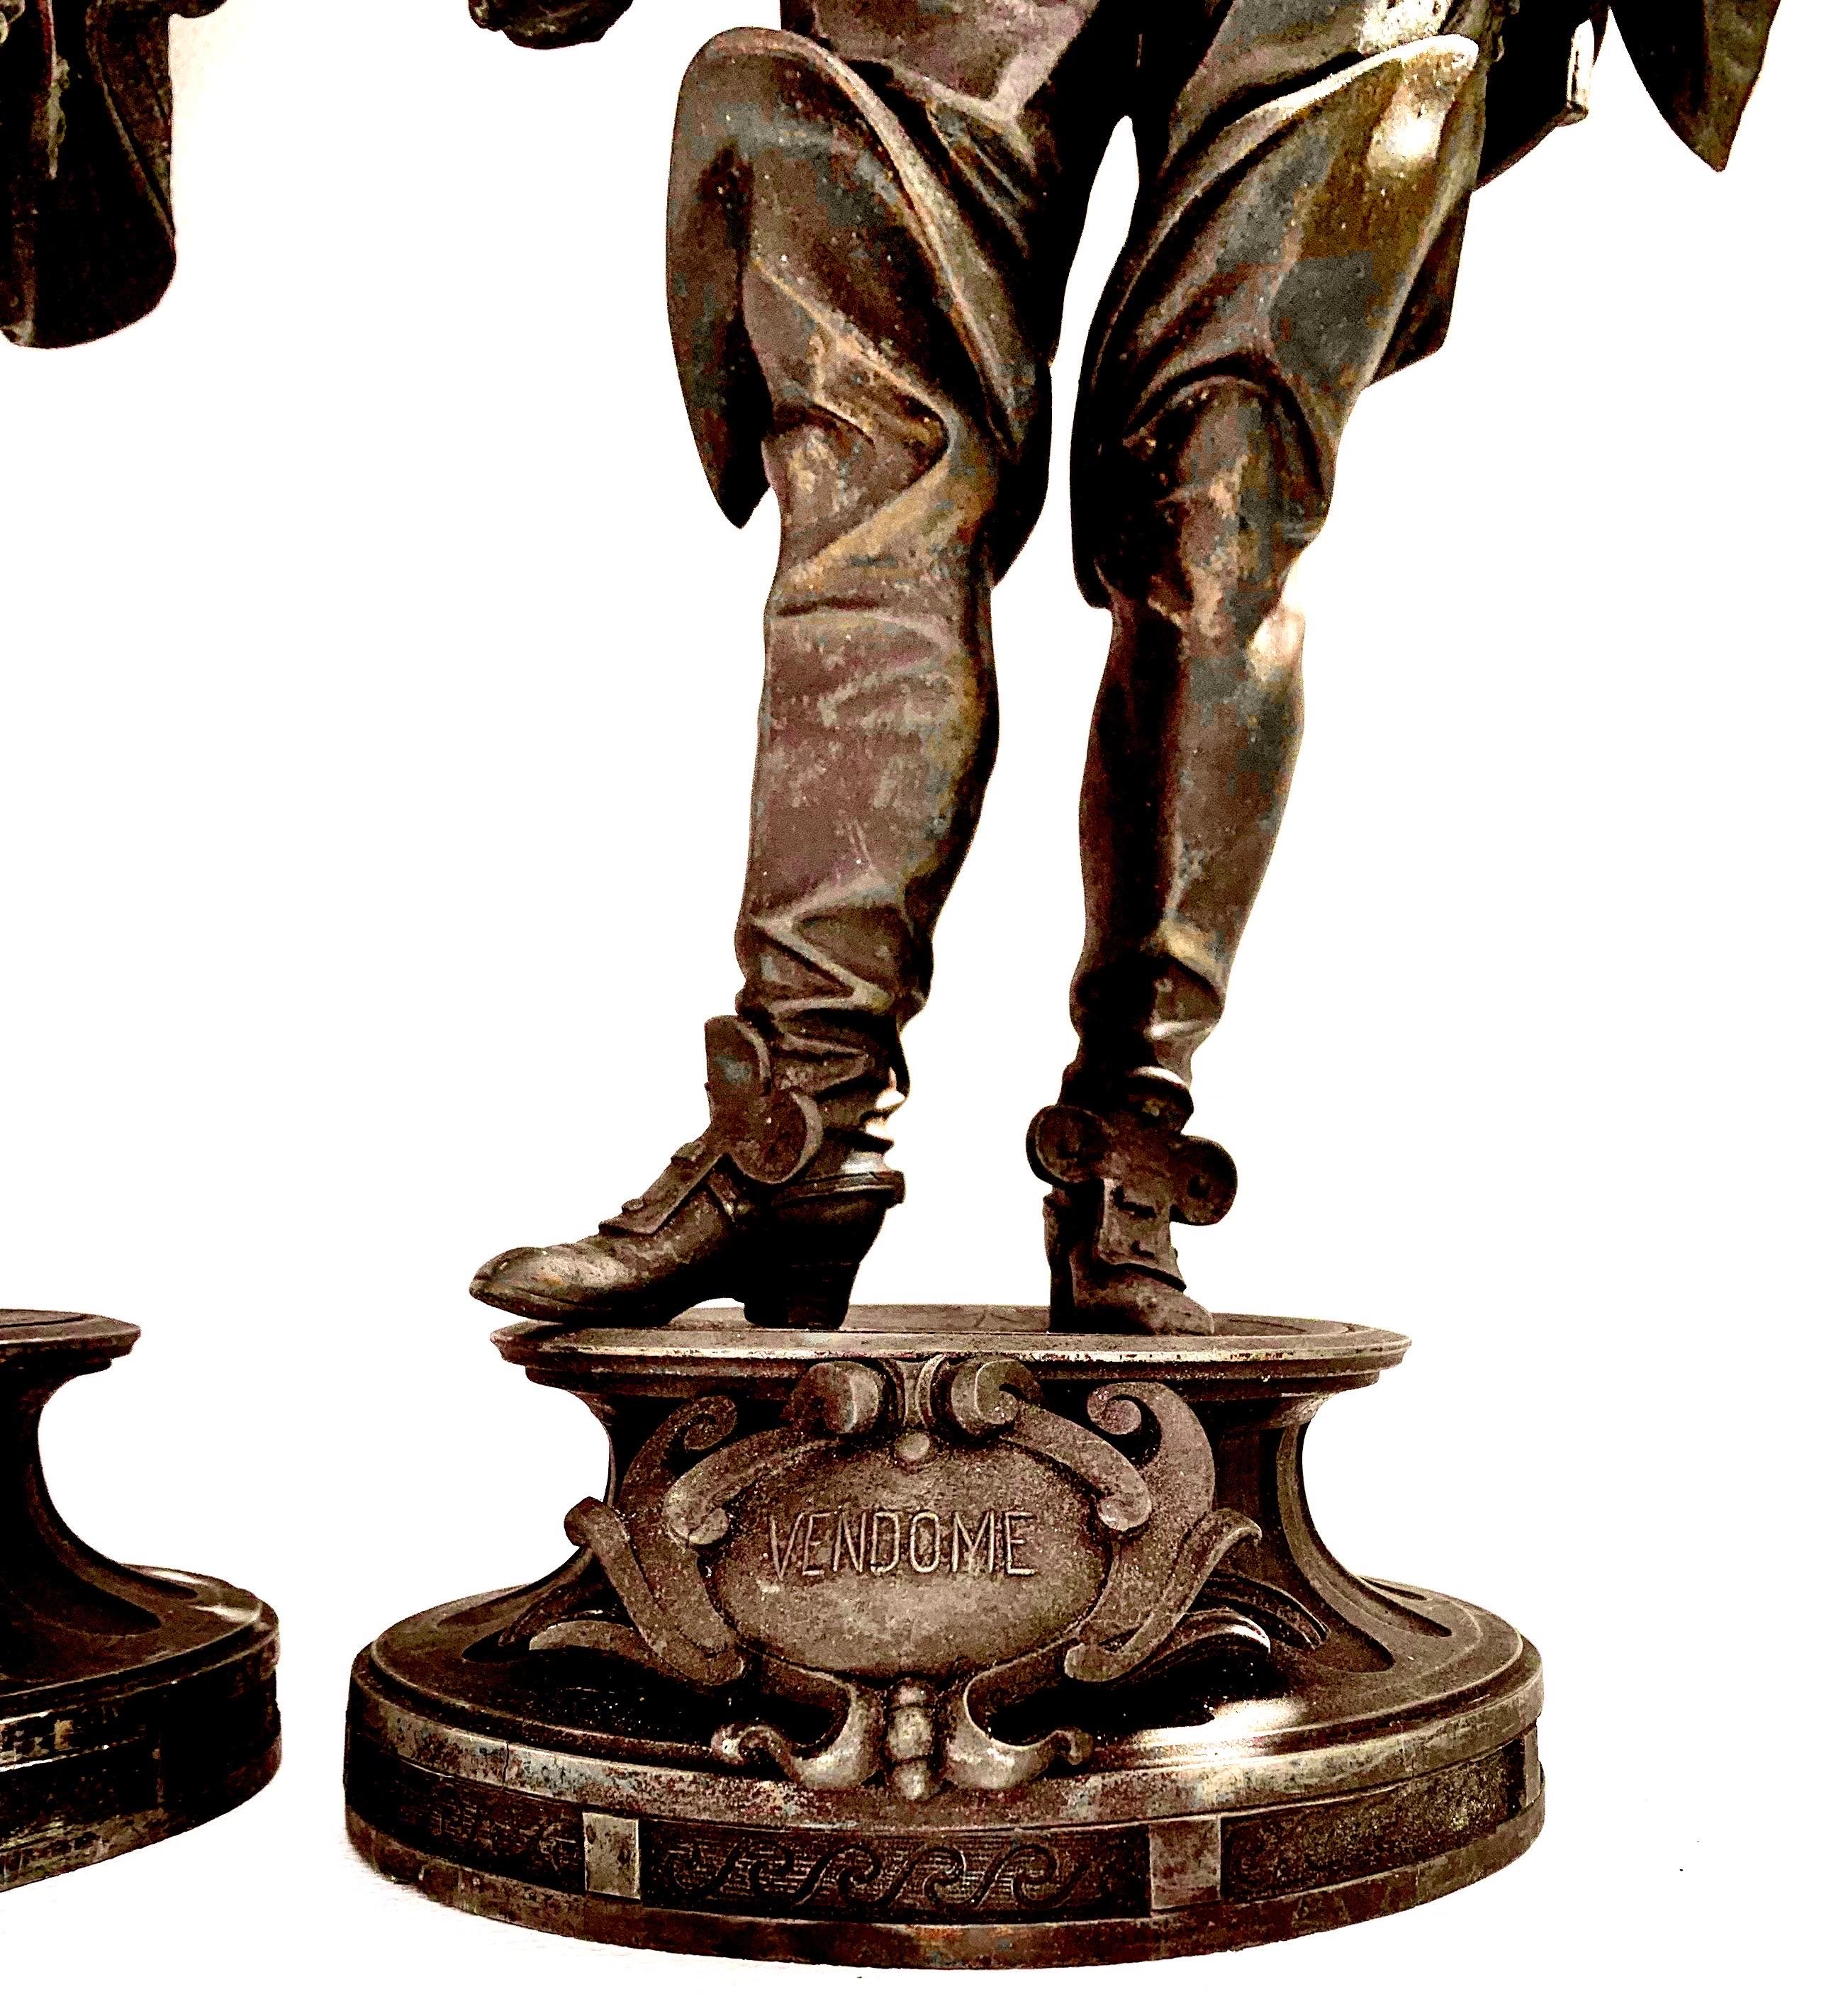 Spelter Antique Late 19th Century Pair of Historical Figures, Conde' and Vendome